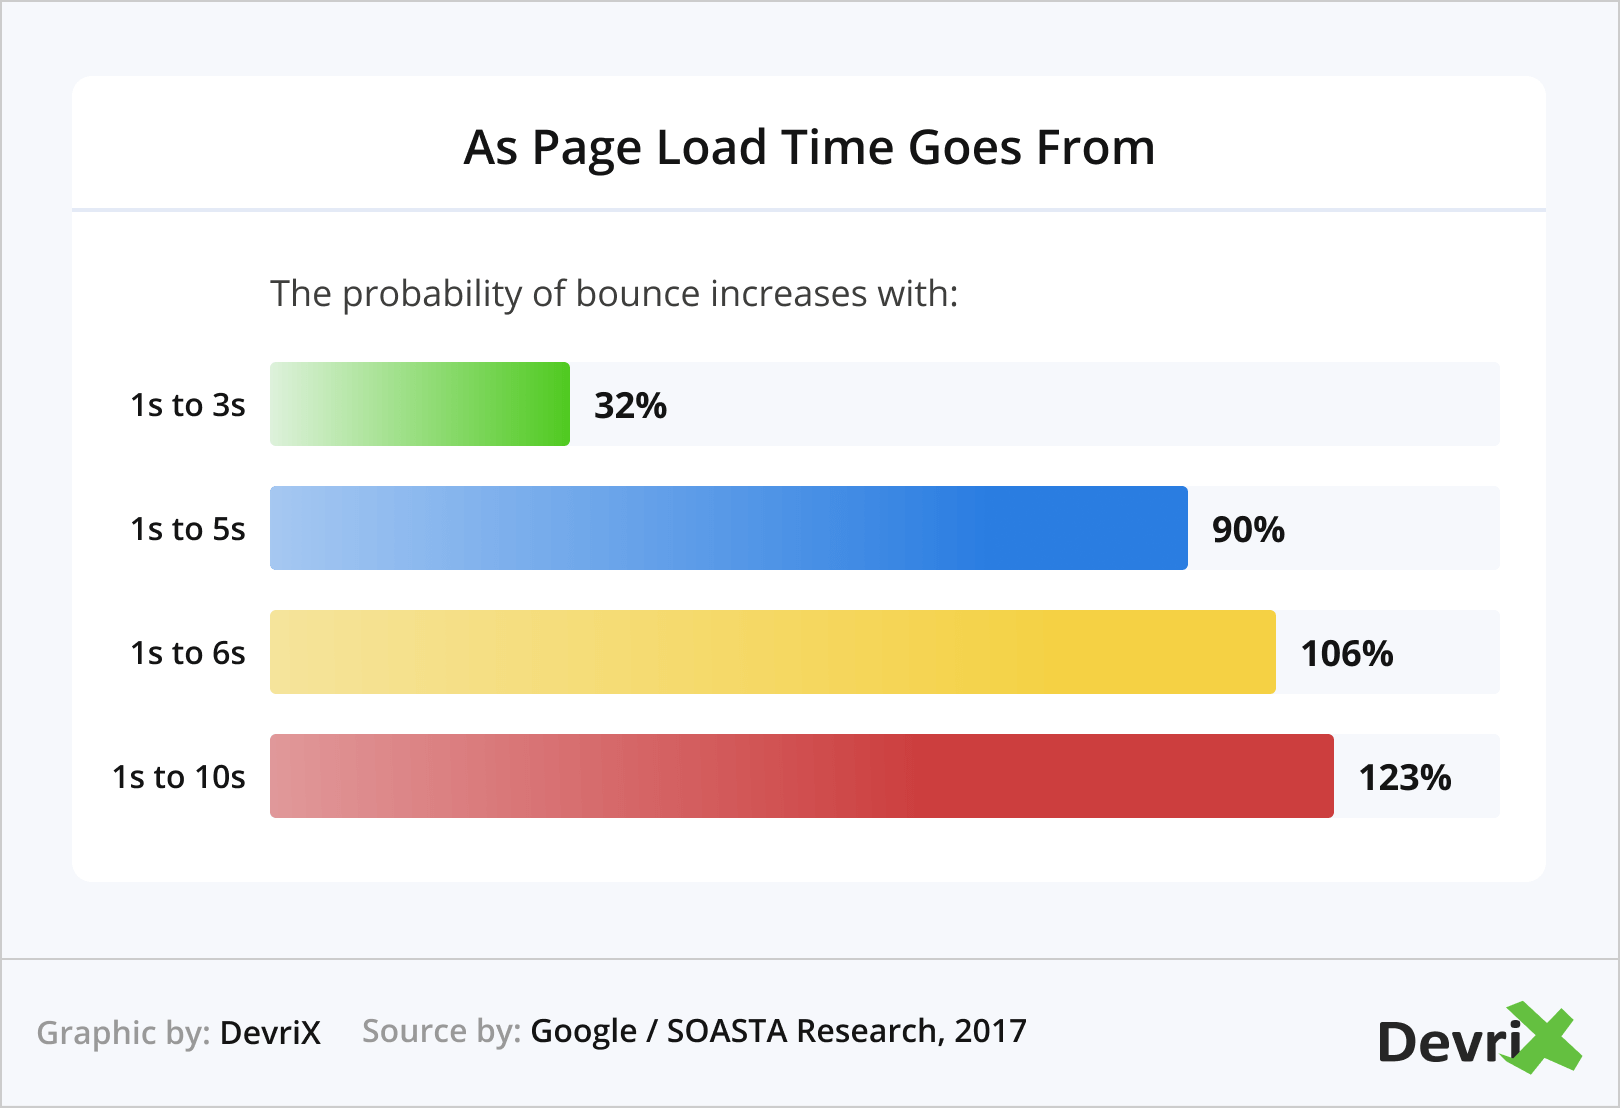 As Page Load Time Goes From